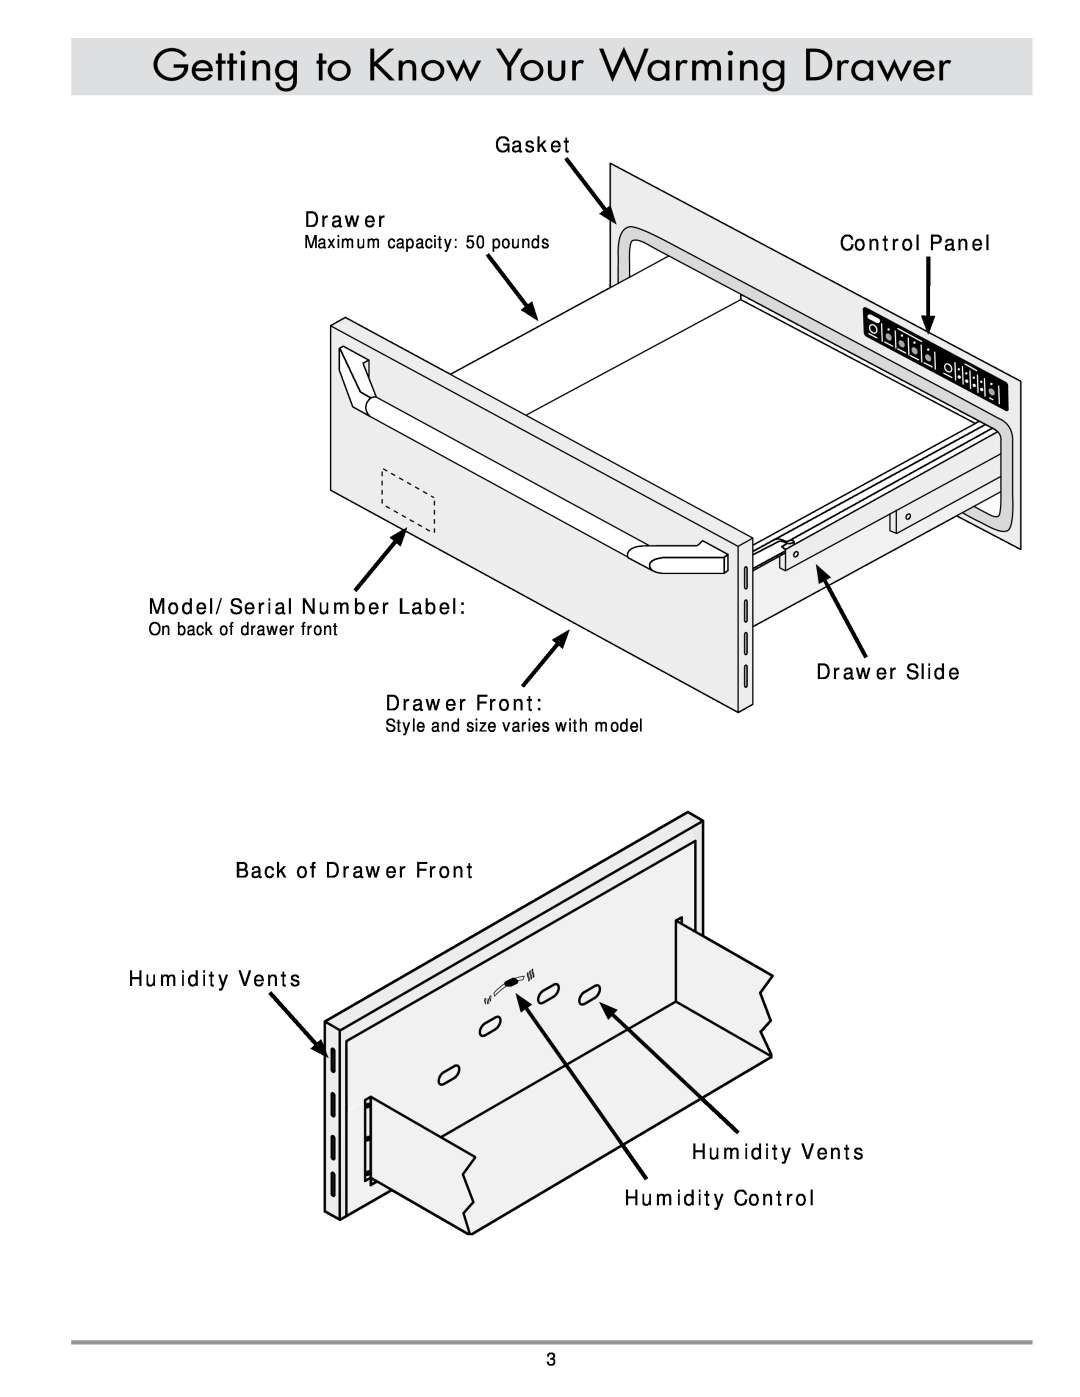 Dacor PWD27, PWD30 Getting to Know Your Warming Drawer, Gasket Drawer, Model/Serial Number Label, Drawer Front 